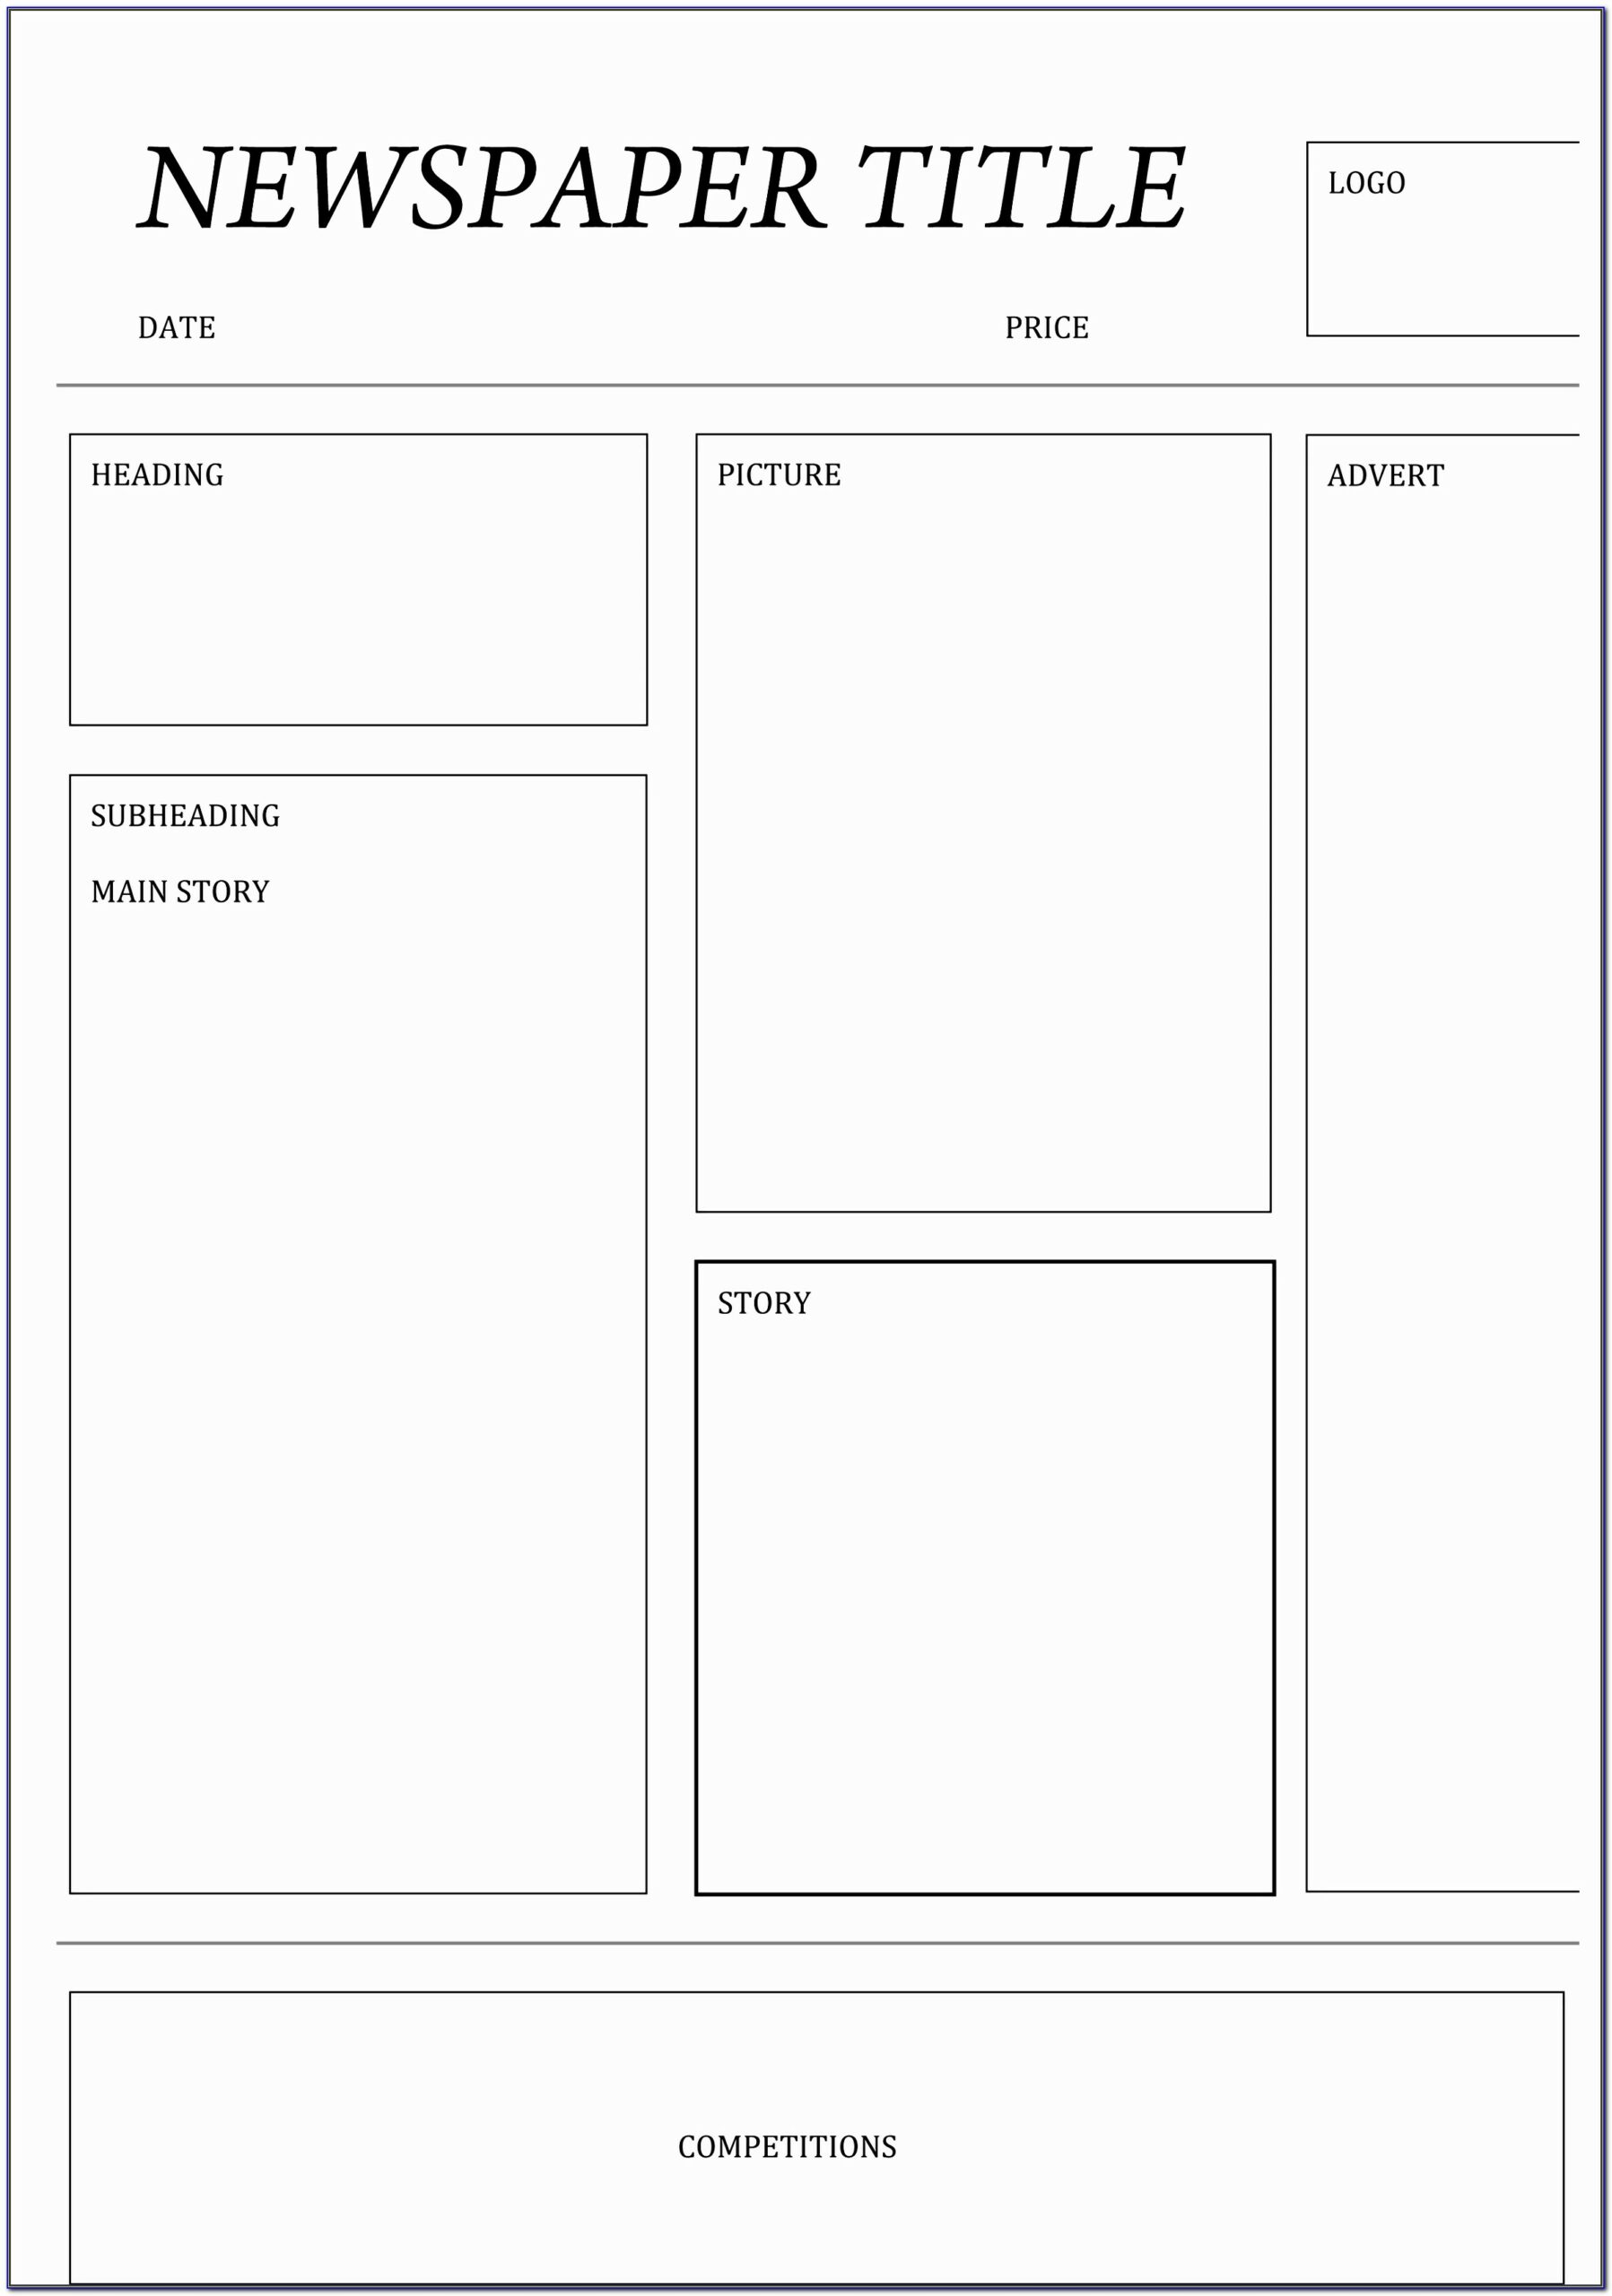 Print Blank Invoice Forms